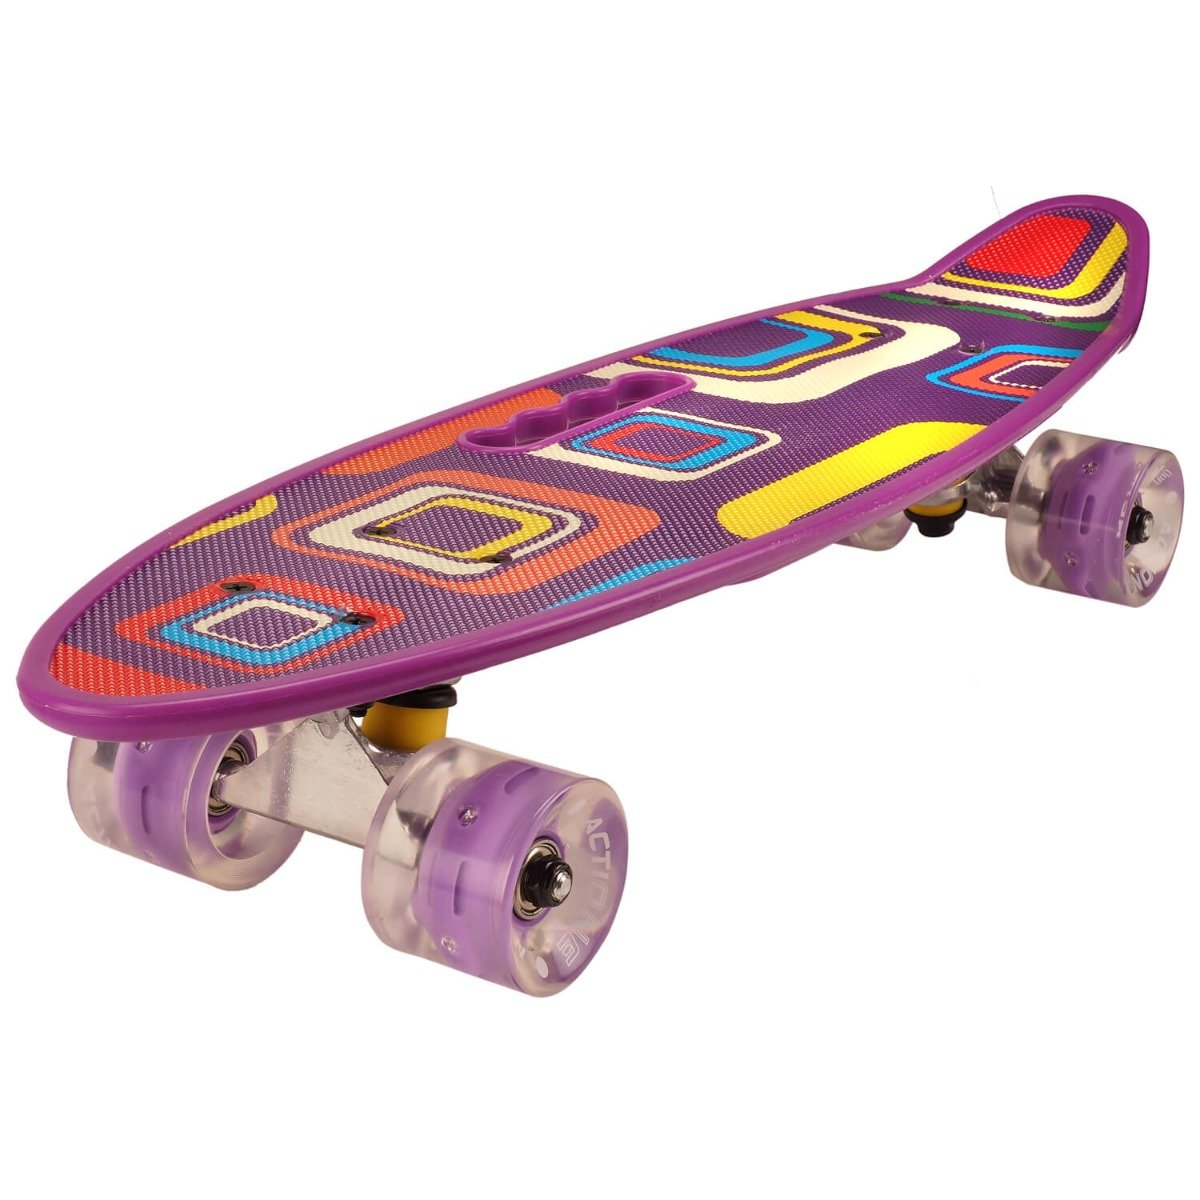 Penny board portabil Action One, ABEC-7, Geometrical Action One imagine 2022